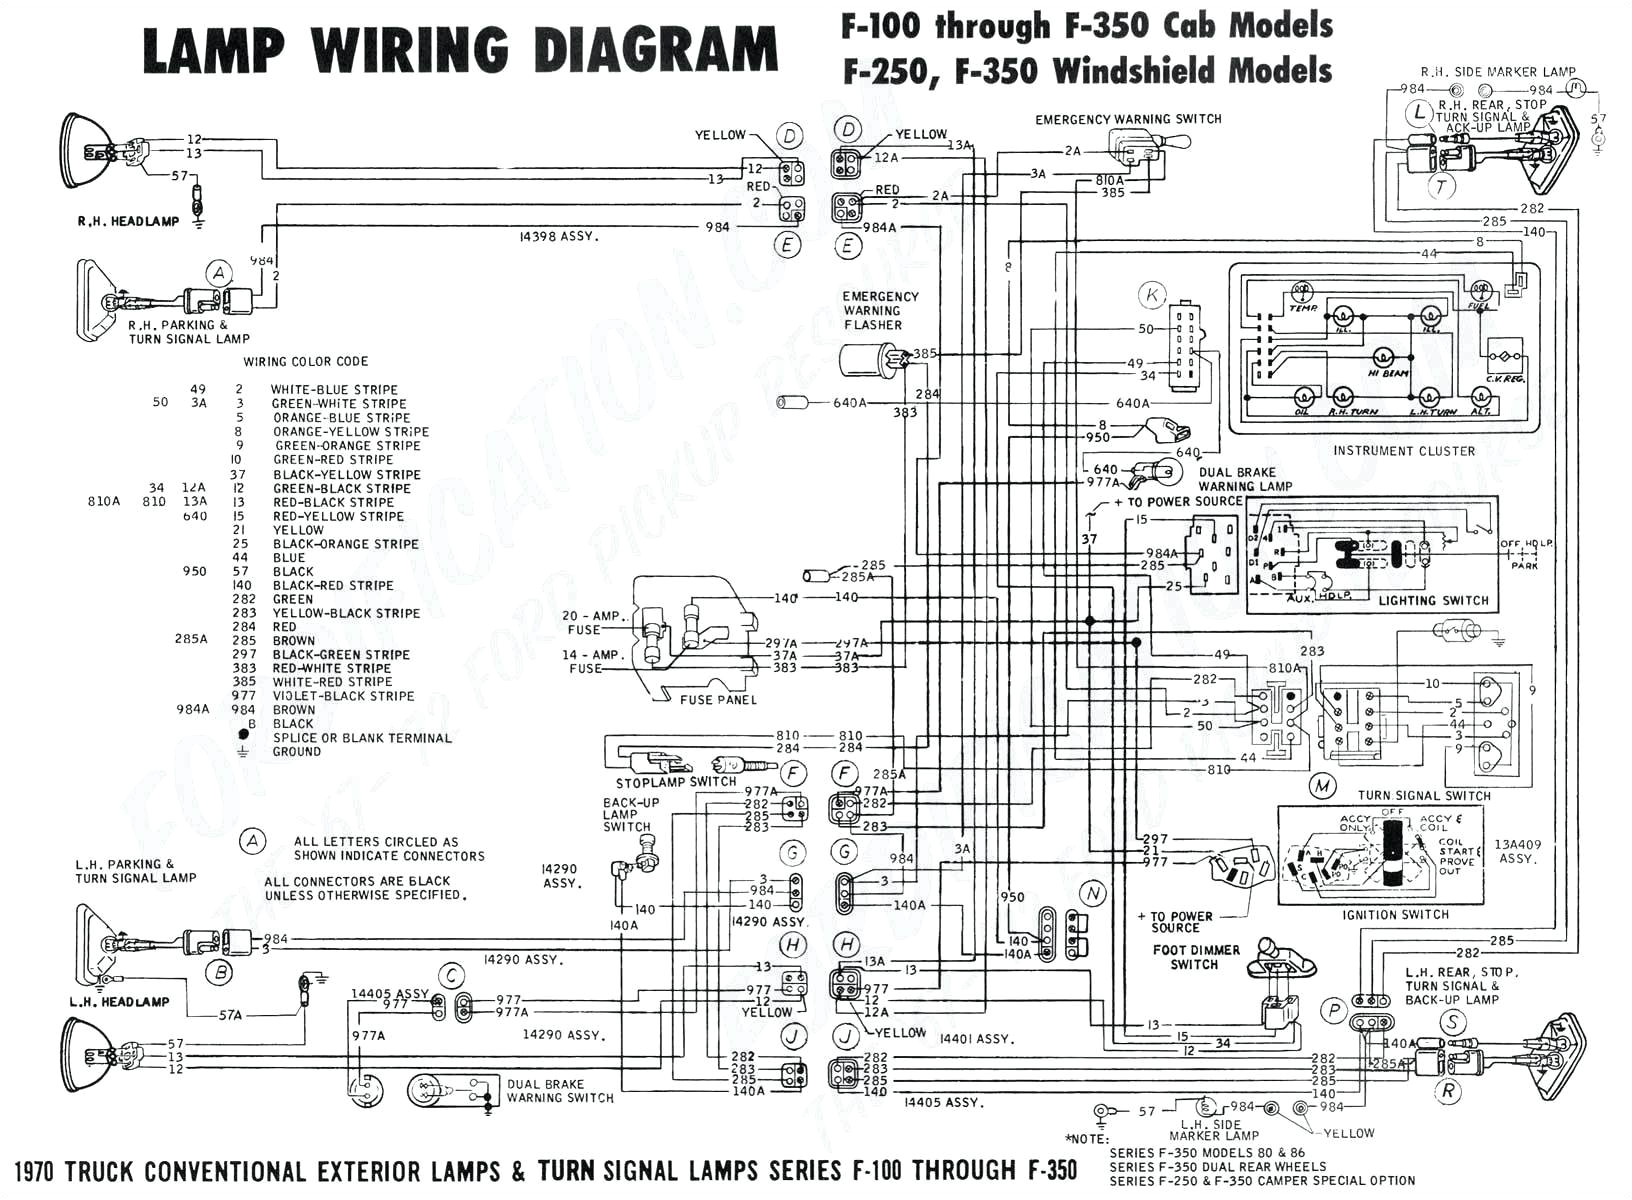 x 1996 ford ignition switch diagram wiring diagram files ford ignition diagram ford ignition diagram